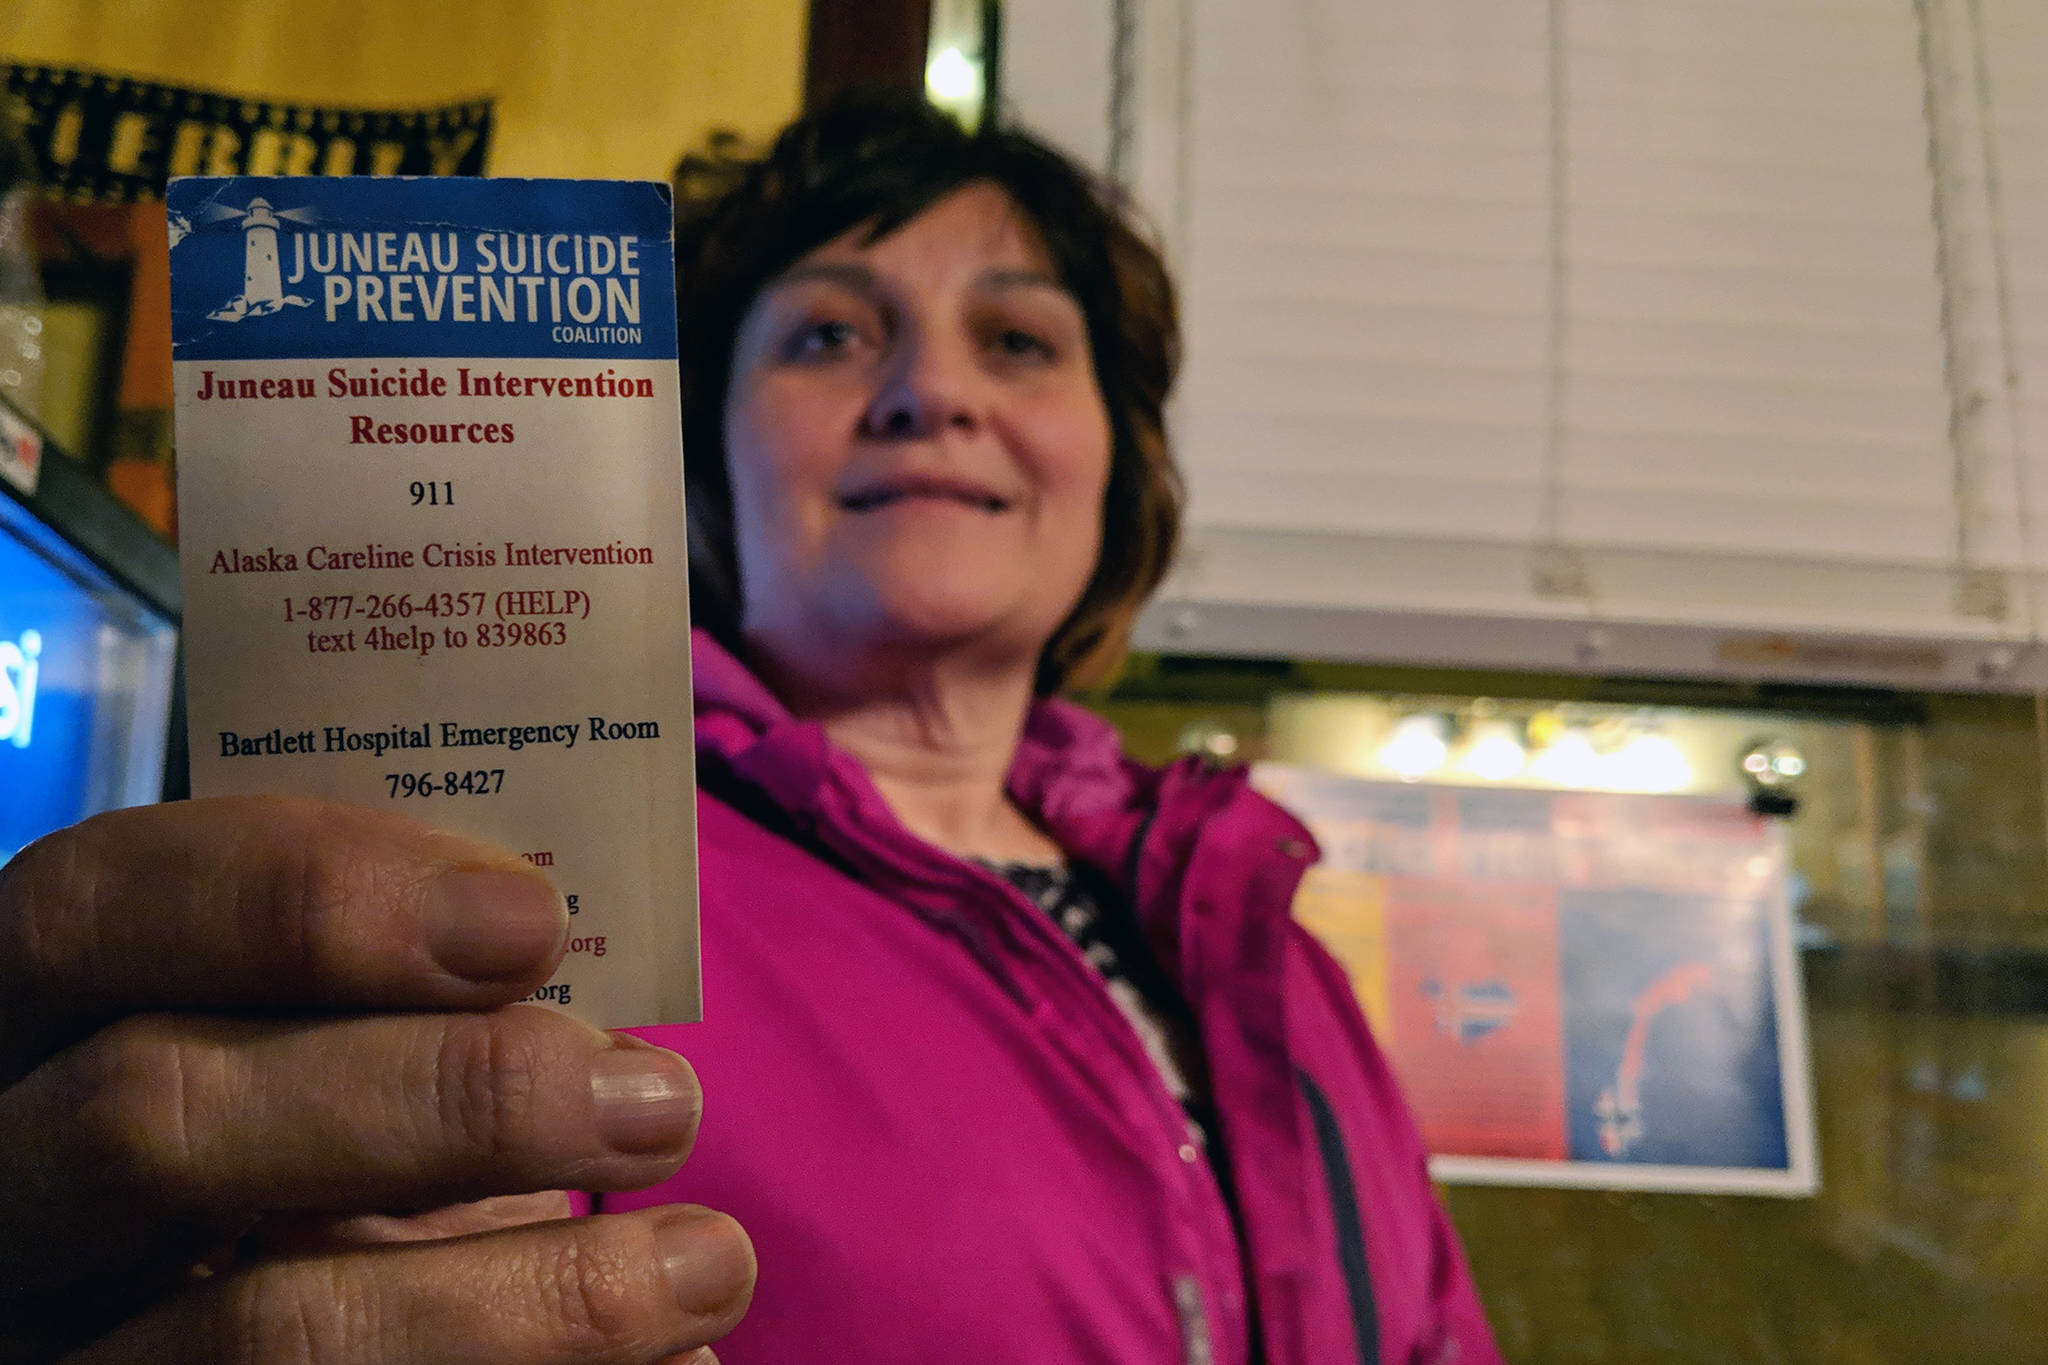 Jan Reece, outreach/training specialist for Juneau Suicide Prevention Coalition, holds up a card with contact information for suicide prevention resources after a screening of “The S-Word” at Gold Town Theater, Tuesday, March 5, 2019. (Ben Hohenstatt | Capital City Weekly)